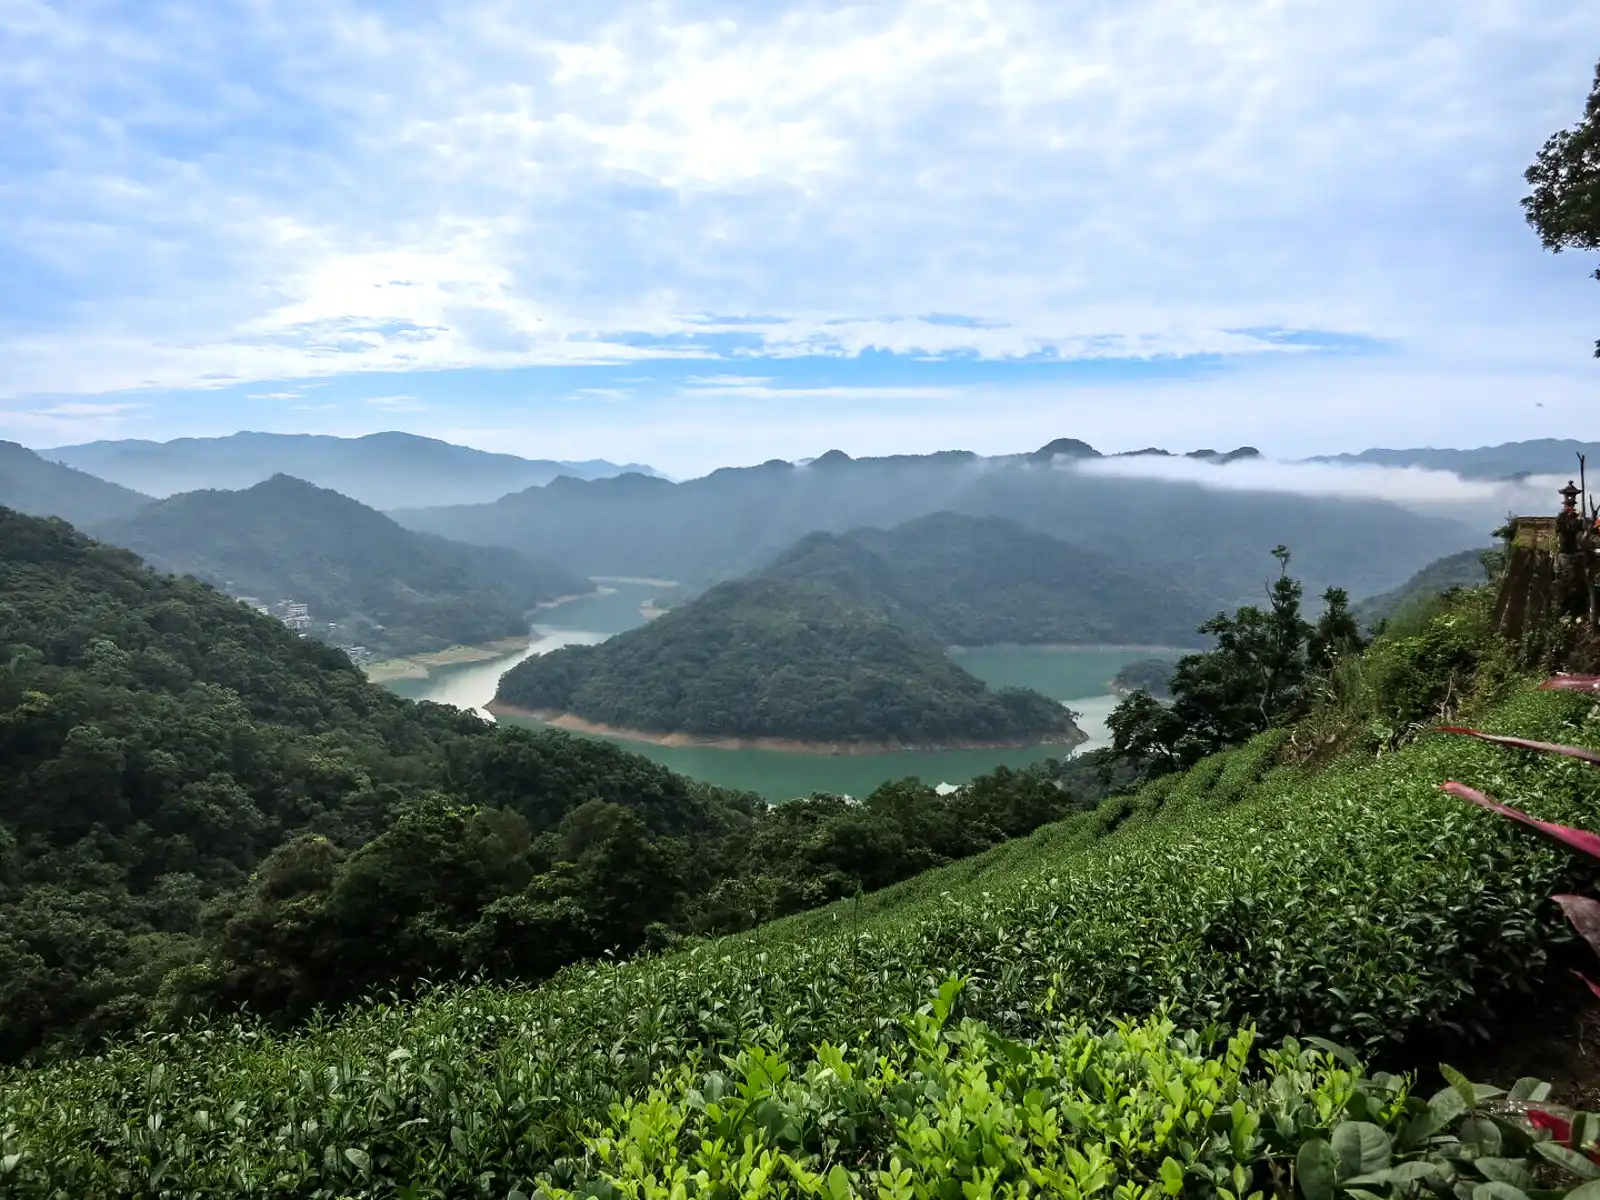 A view of Thousand Island Lake from atop a tea plantation.